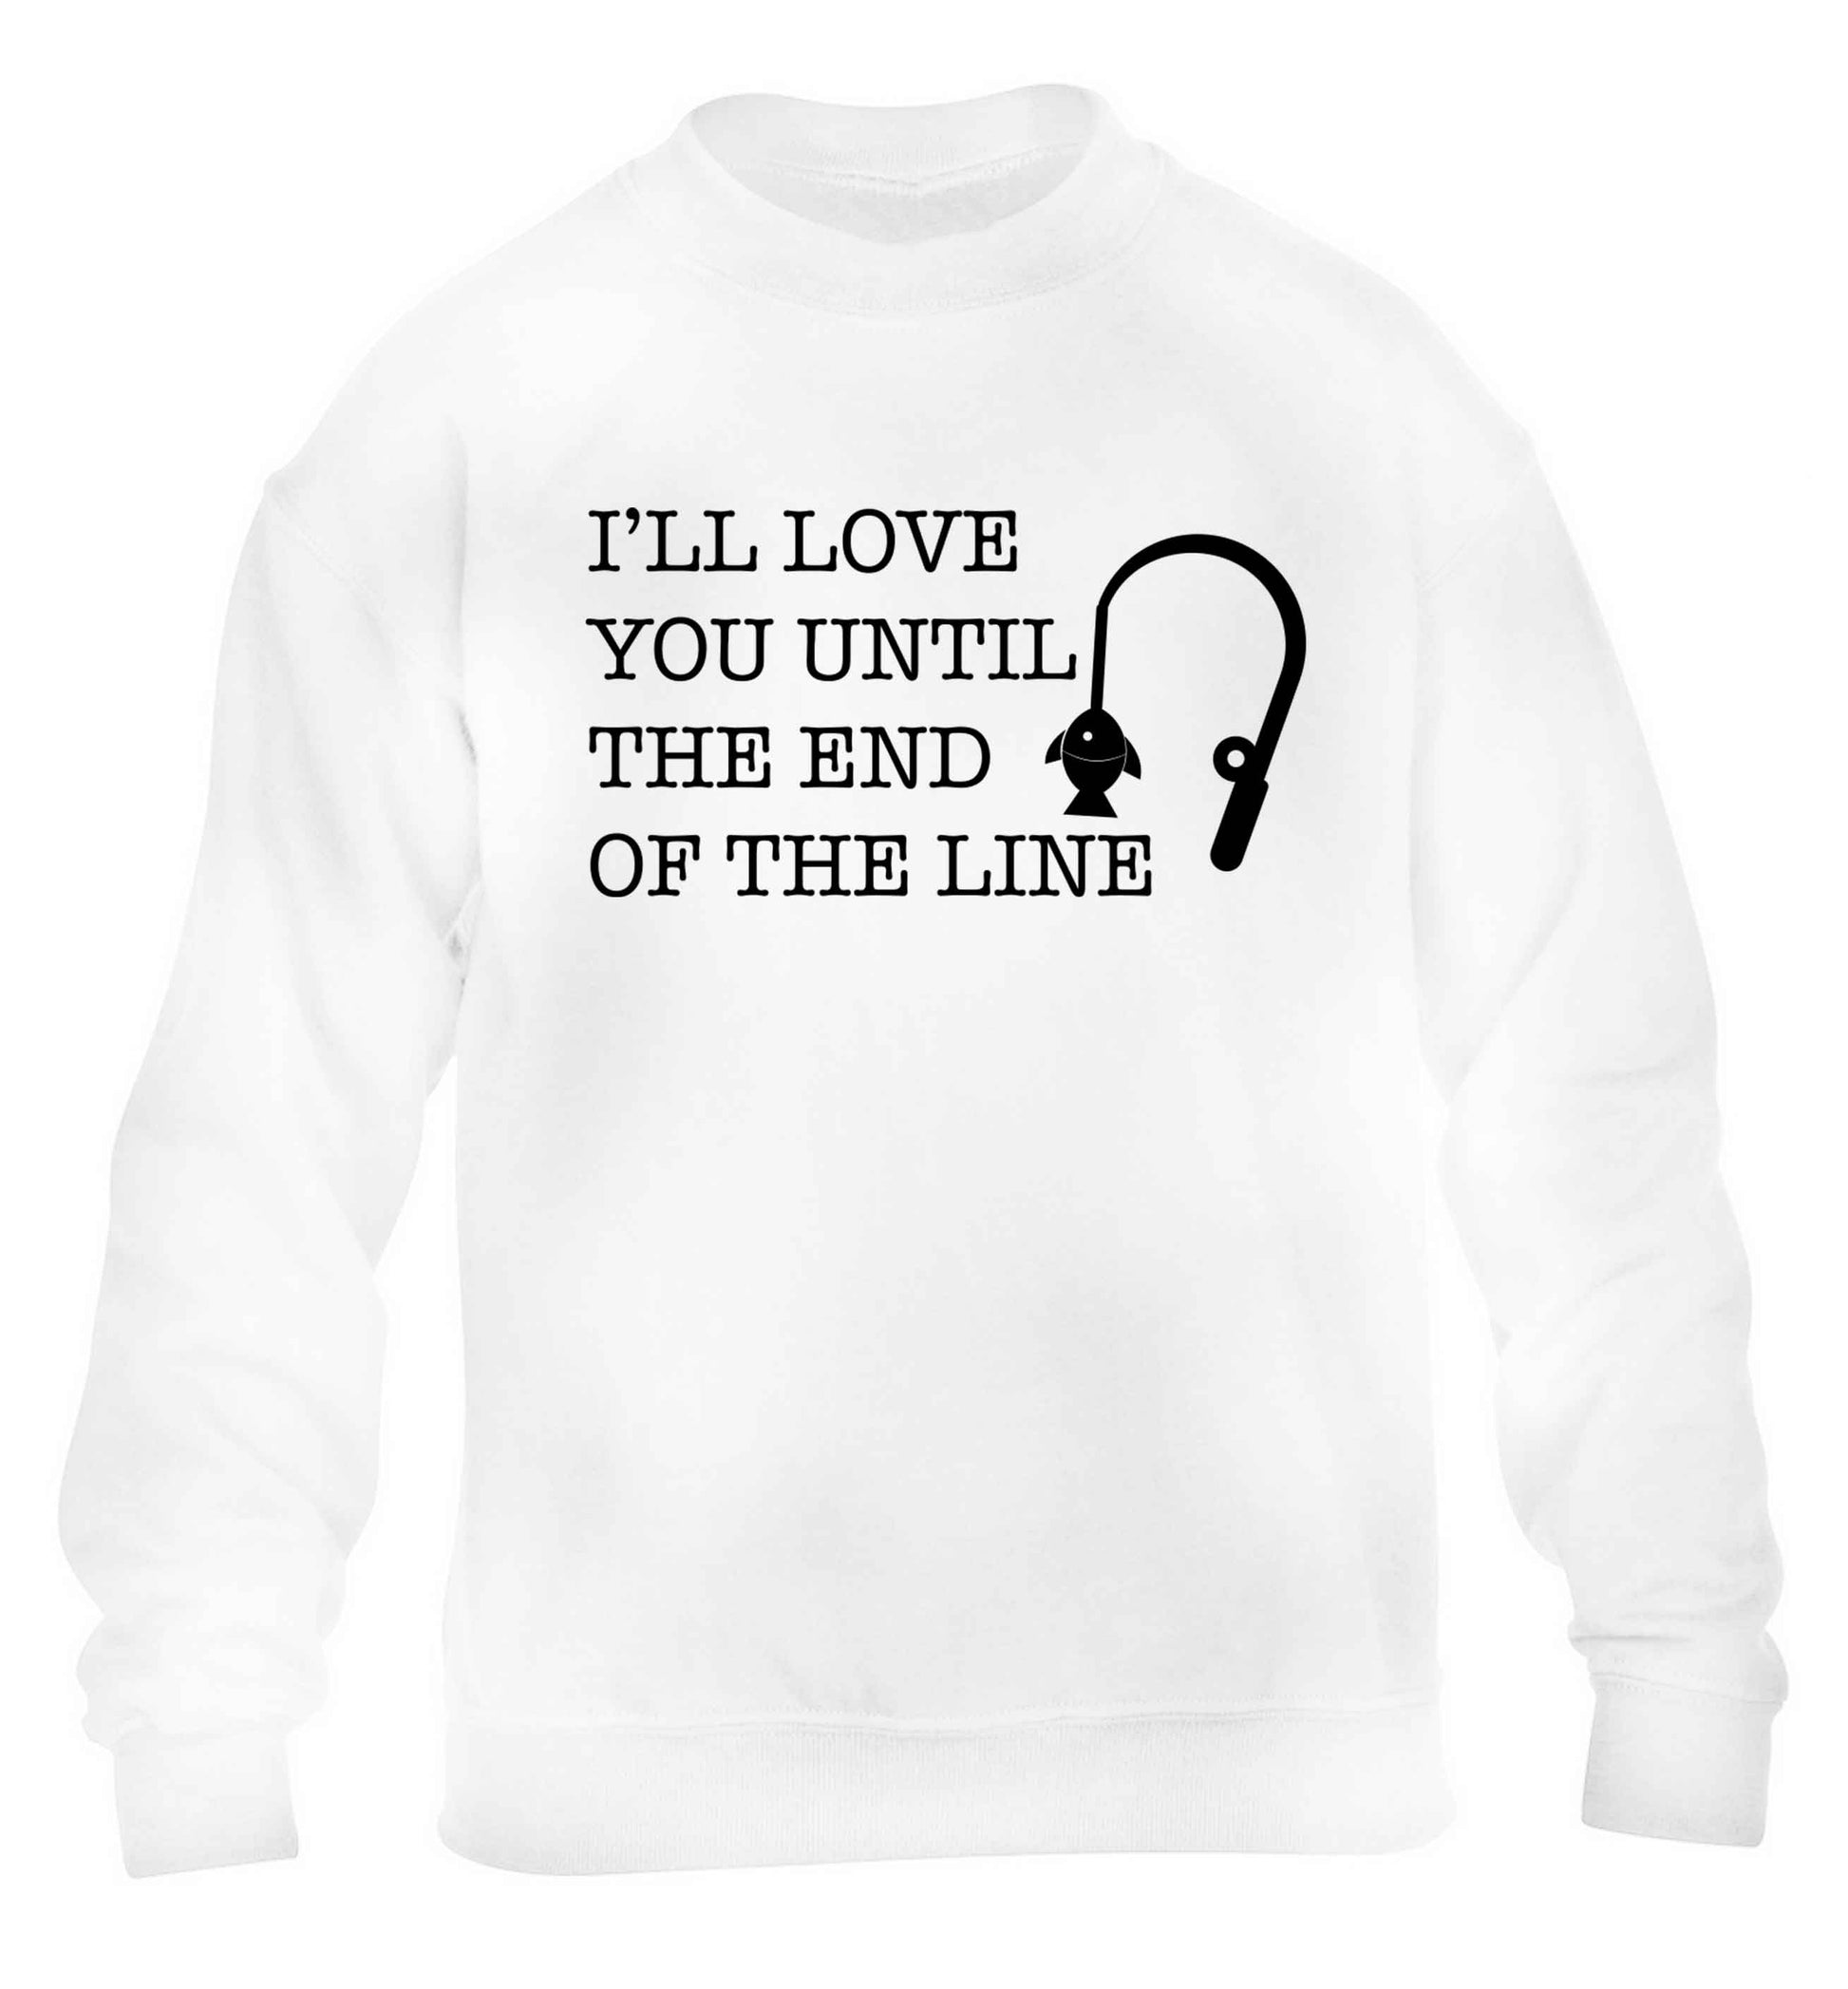 I'll love you until the end of the line children's white sweater 12-13 Years